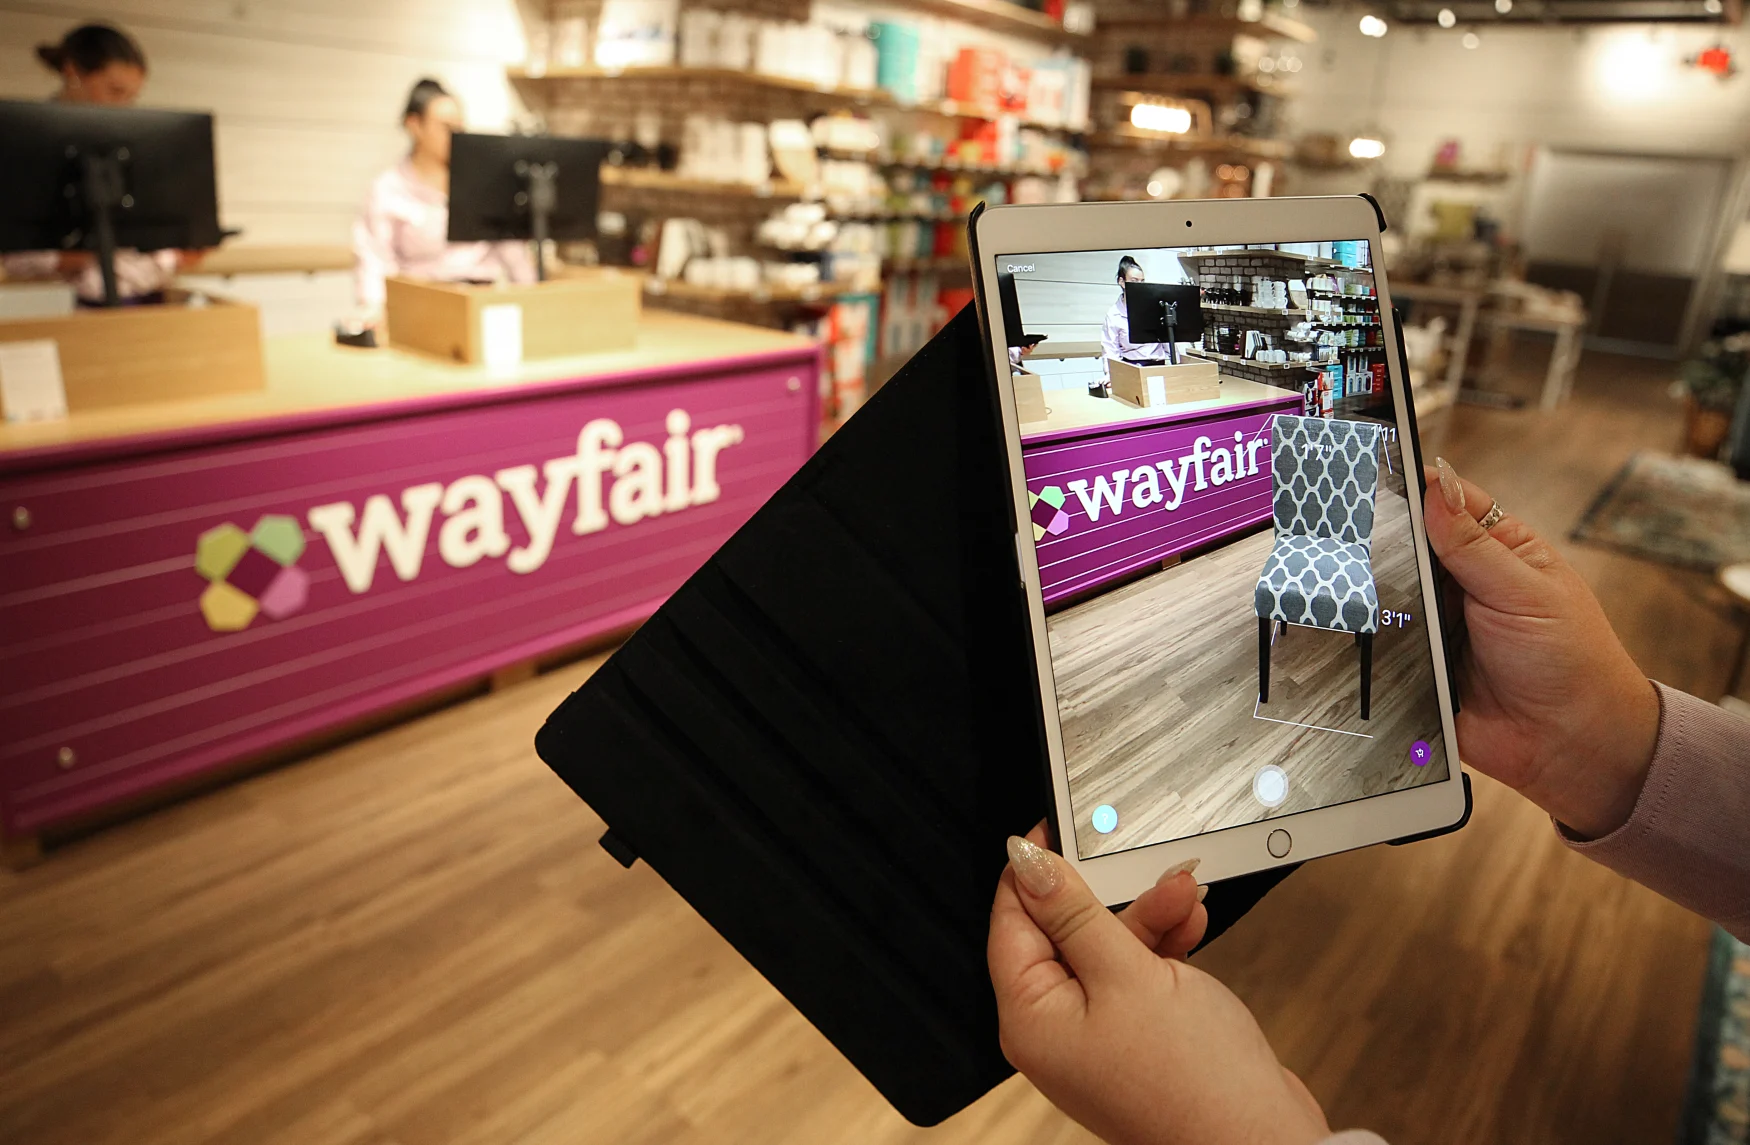 NATICK, MA - AUGUST 20: A virtual reality app is demonstrated at Wayfair's first store in the Natick Mall in Natick, MA on Aug. 20, 2019. Shoppers can don virtual reality headsets to see how furniture would fit into a space, using Wayfairs Room Planner tool. They can virtually climb onto a dining room table to get a 360-degree view of a digitally rendered room, then swap out chairs, chandeliers, and art on the virtual walls. Thats just one example of how the Boston-based e-commerce giant has used its digital DNA to create its first brick-and-mortar store. It opens Wednesday in the Natick Mall. Product information, including prices and customer ratings, is displayed on screens that update in real time to reflect online price changes. Staffers carry iPads with an augmented reality tool that makes furniture appear in a 3-D setting, or they can snap a picture of an item in the store and find dozens like it online. (Photo by Suzanne Kreiter/The Boston Globe via Getty Images)